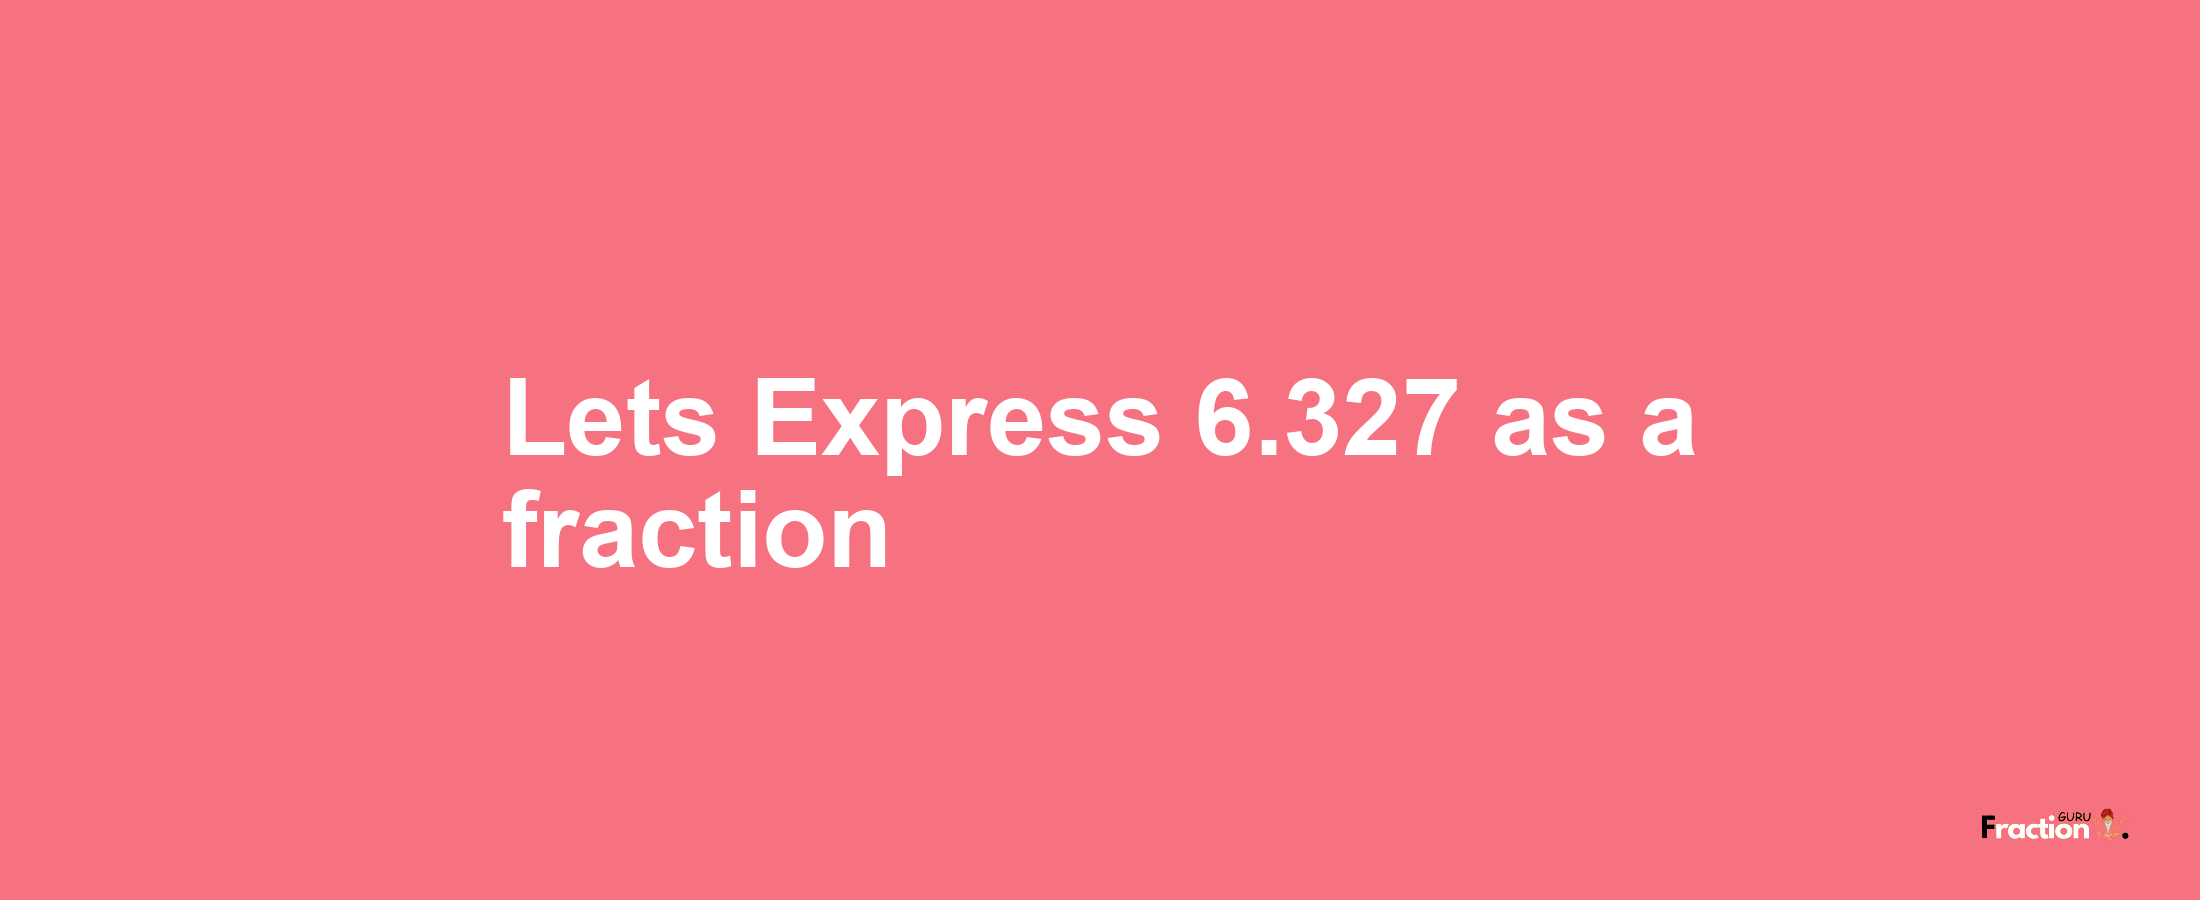 Lets Express 6.327 as afraction